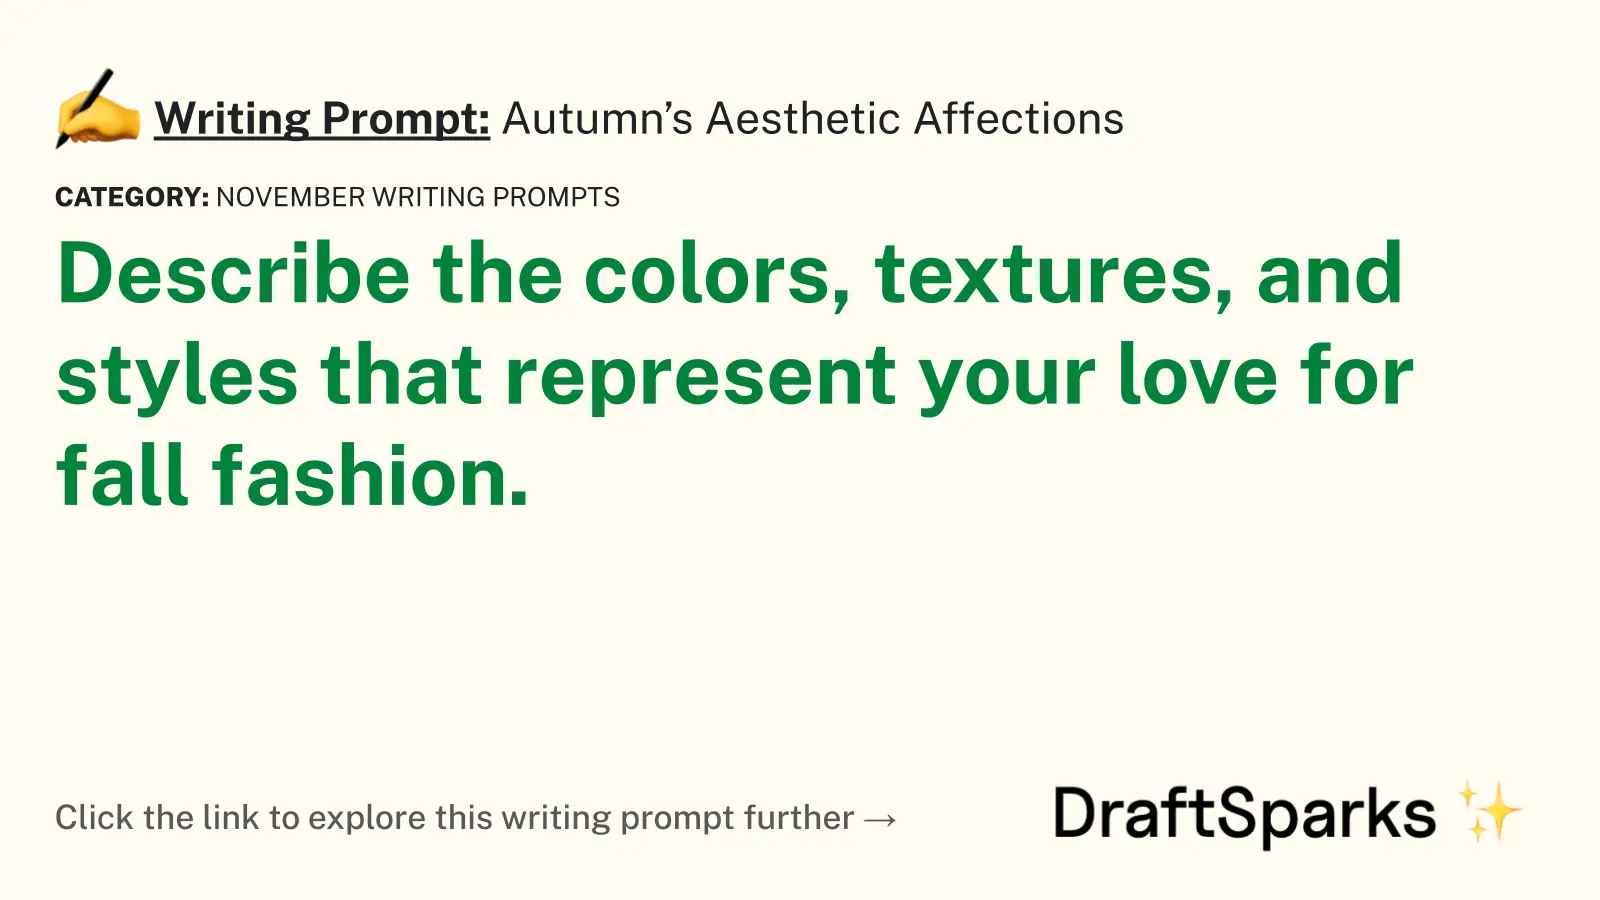 Autumn’s Aesthetic Affections